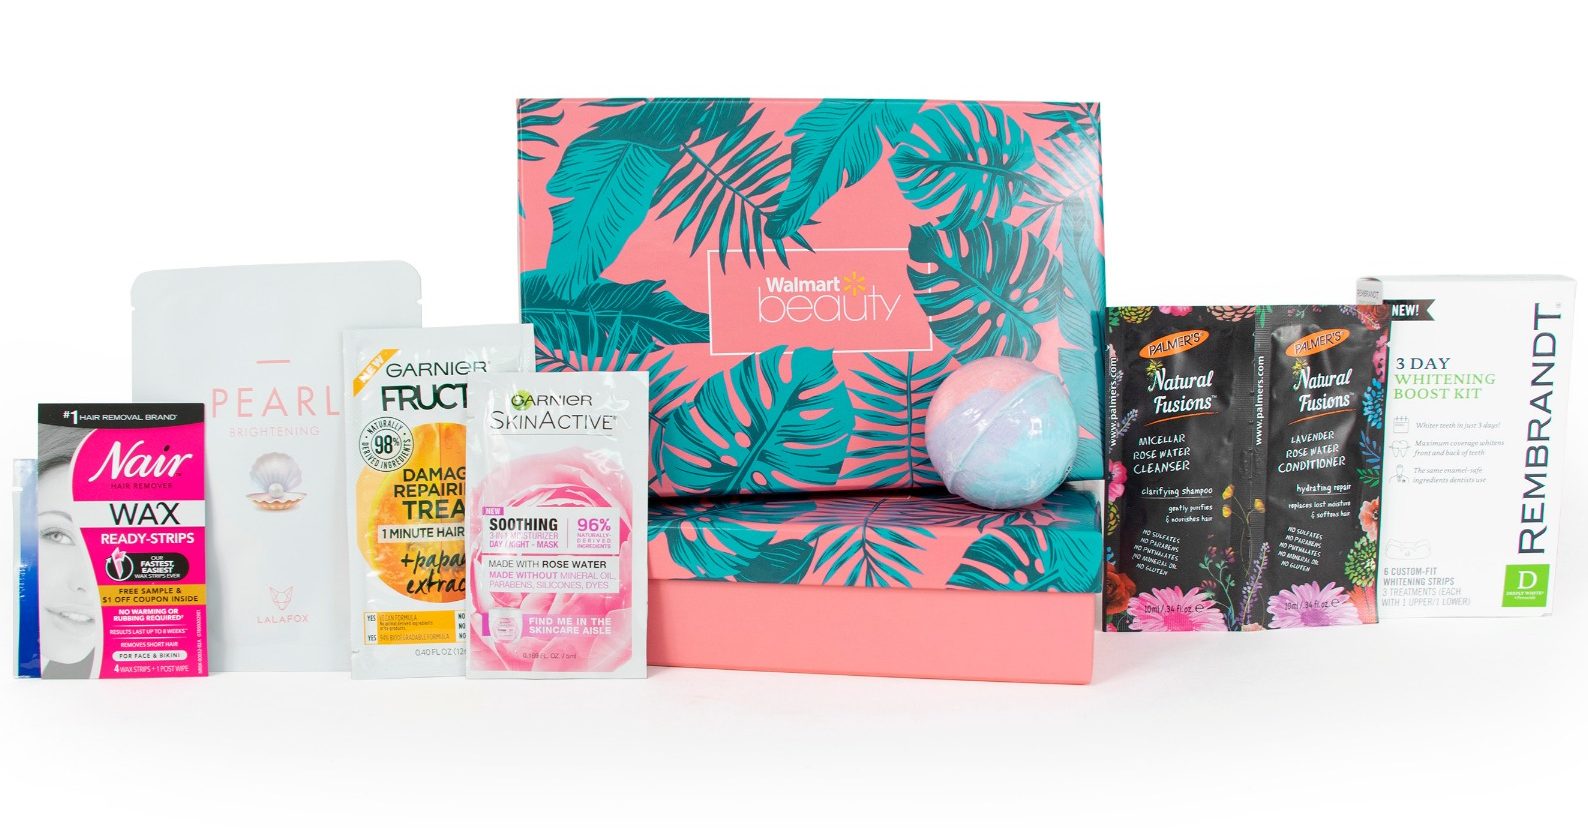 New Walmart Beauty Box for Just $5 Shipped!